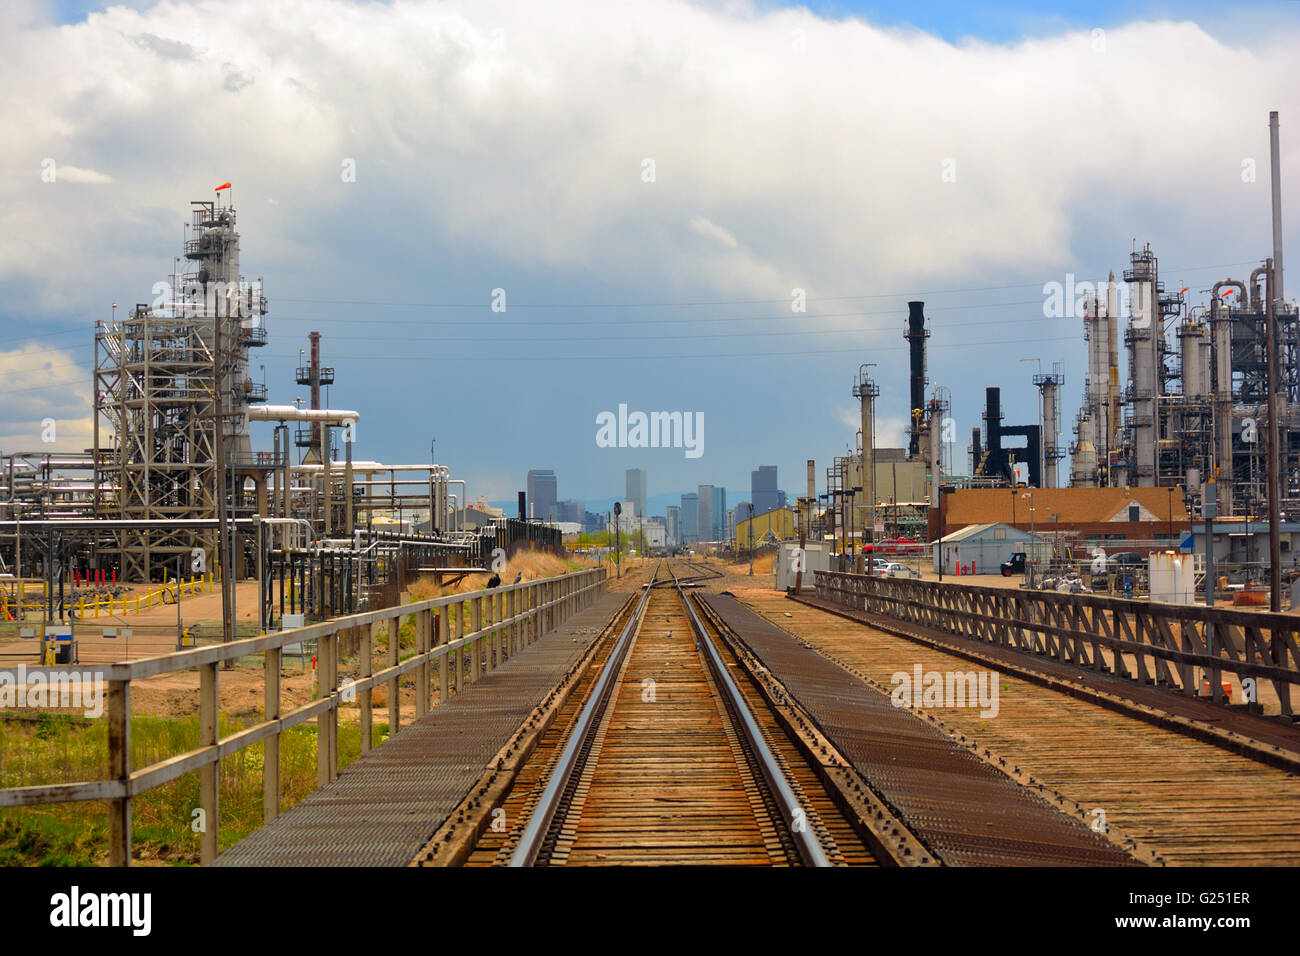 Oil and Gas Refinery Distillation Towers with Railroad Tracks and a Distant City Stock Photo